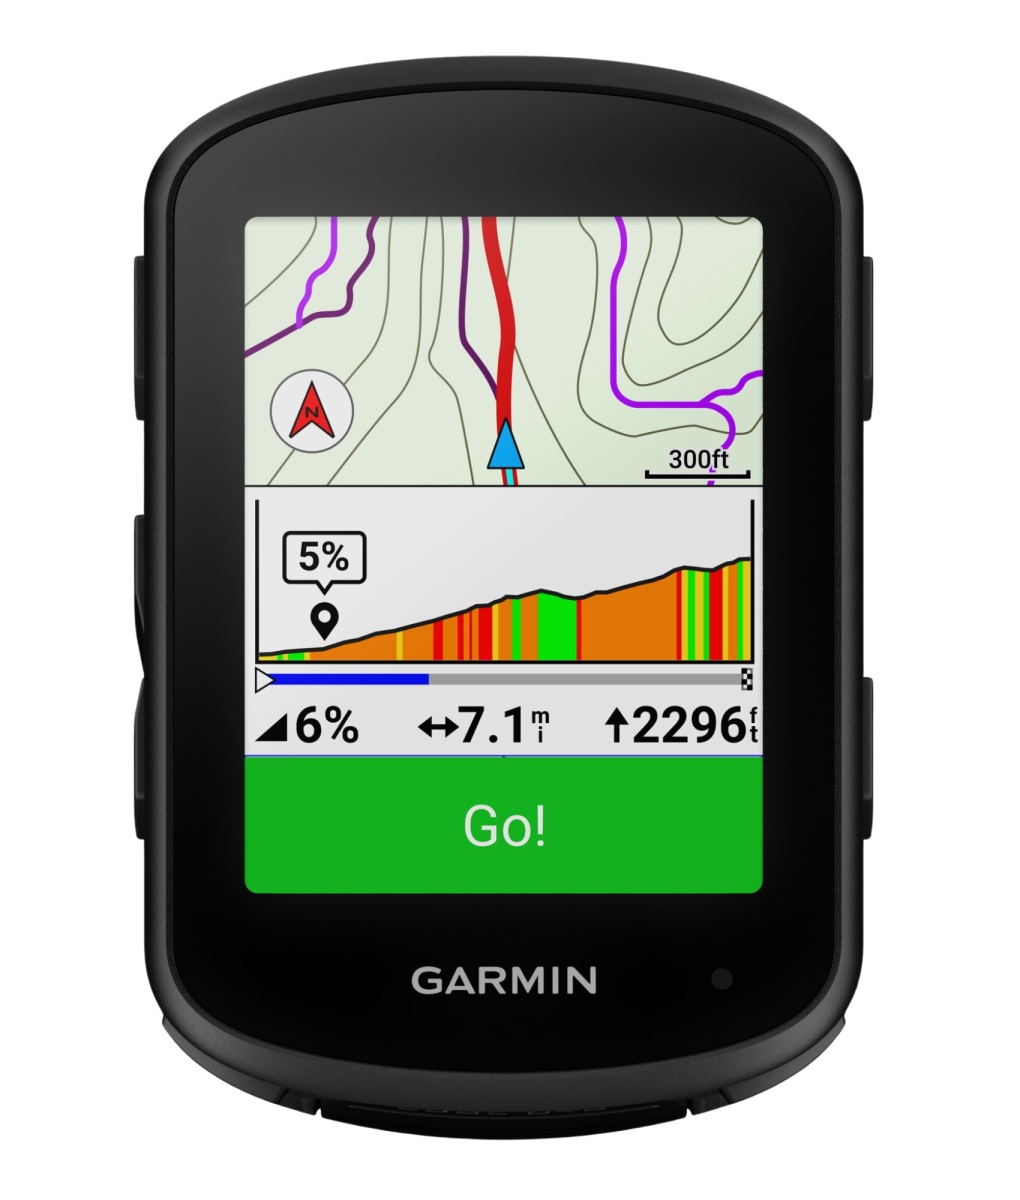 Garmin Edge 1040 Review: It's on Another Level! But